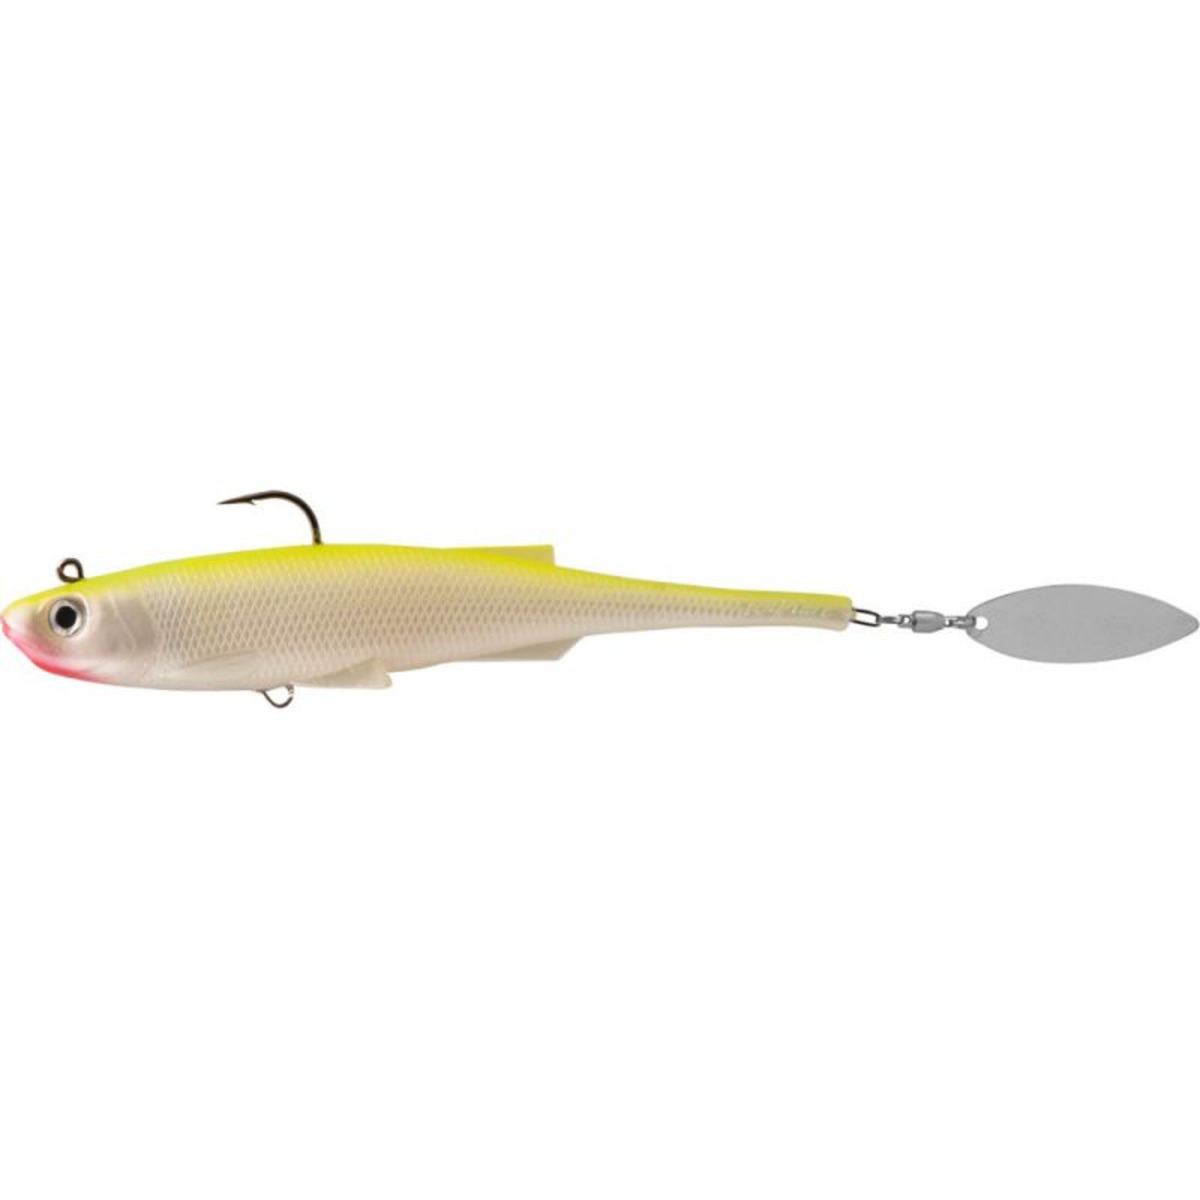 Rapture Mad Spintail Shad - 20.0 g - 100 mm - UV-S